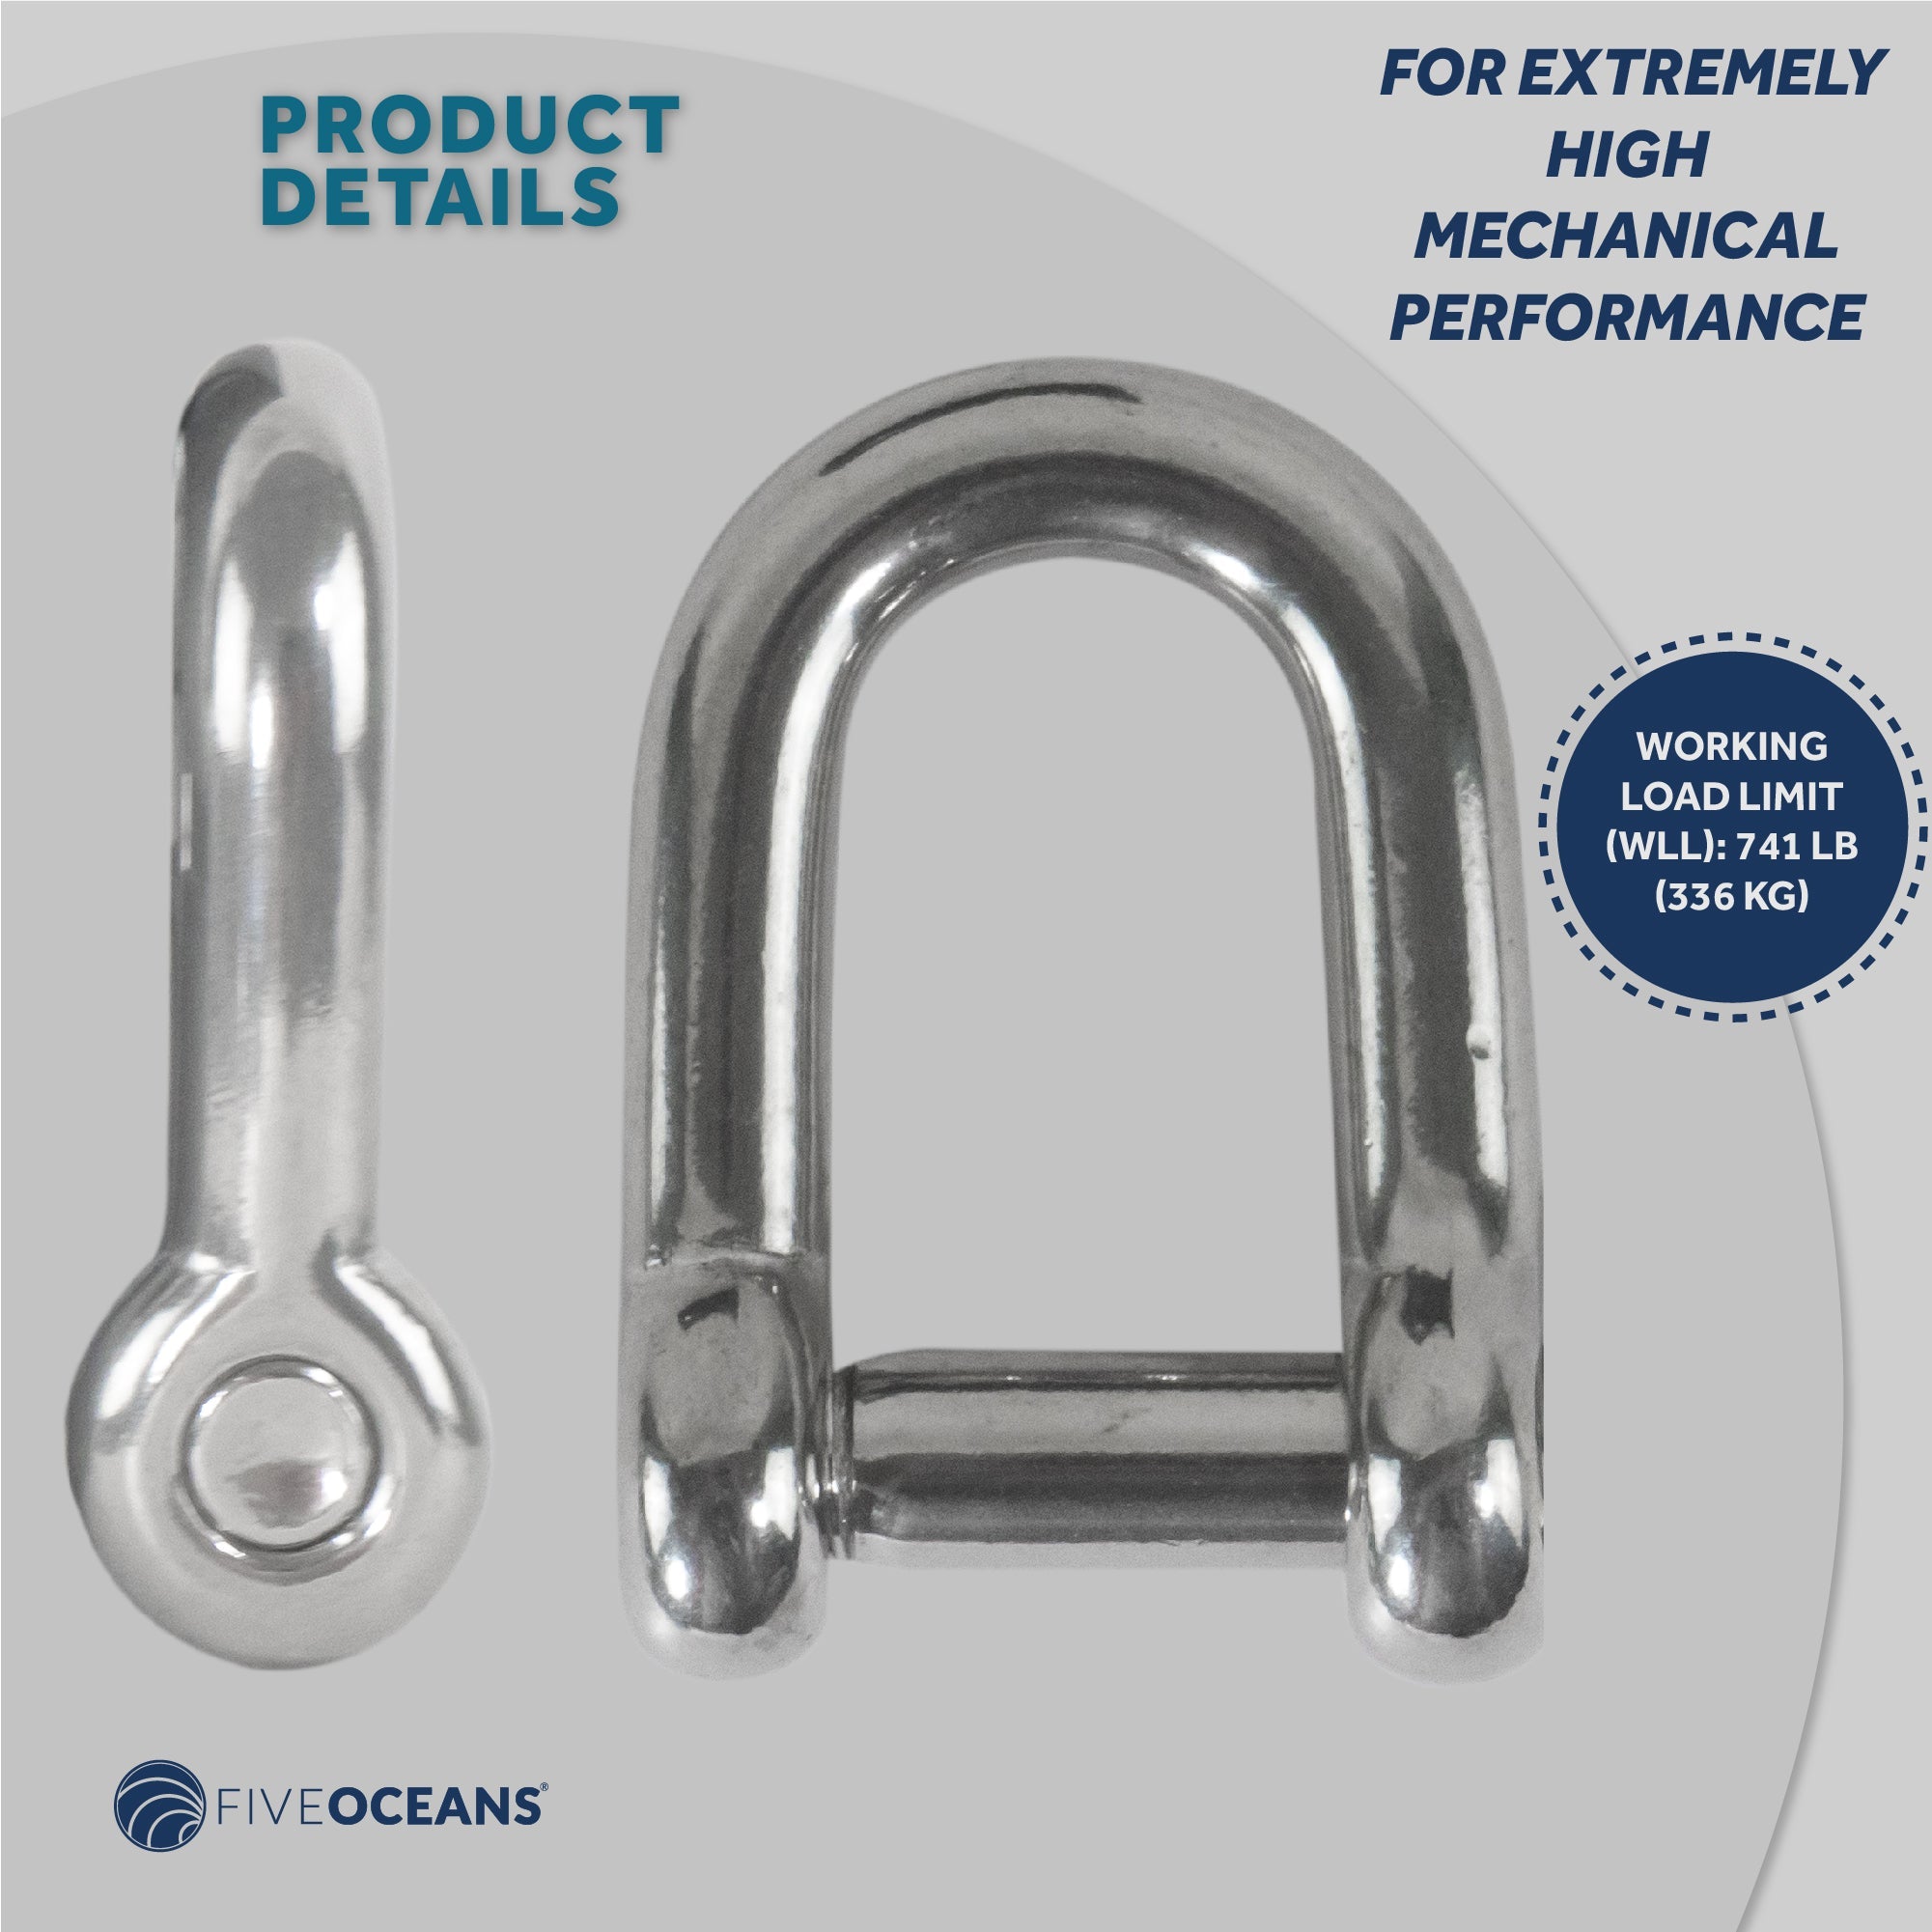 1/4 Captive Pin Shackles, Stainless Steel Anchor Shackle for Boat, Sailboat FO416-Canadian Marine &amp; Outdoor Equipment